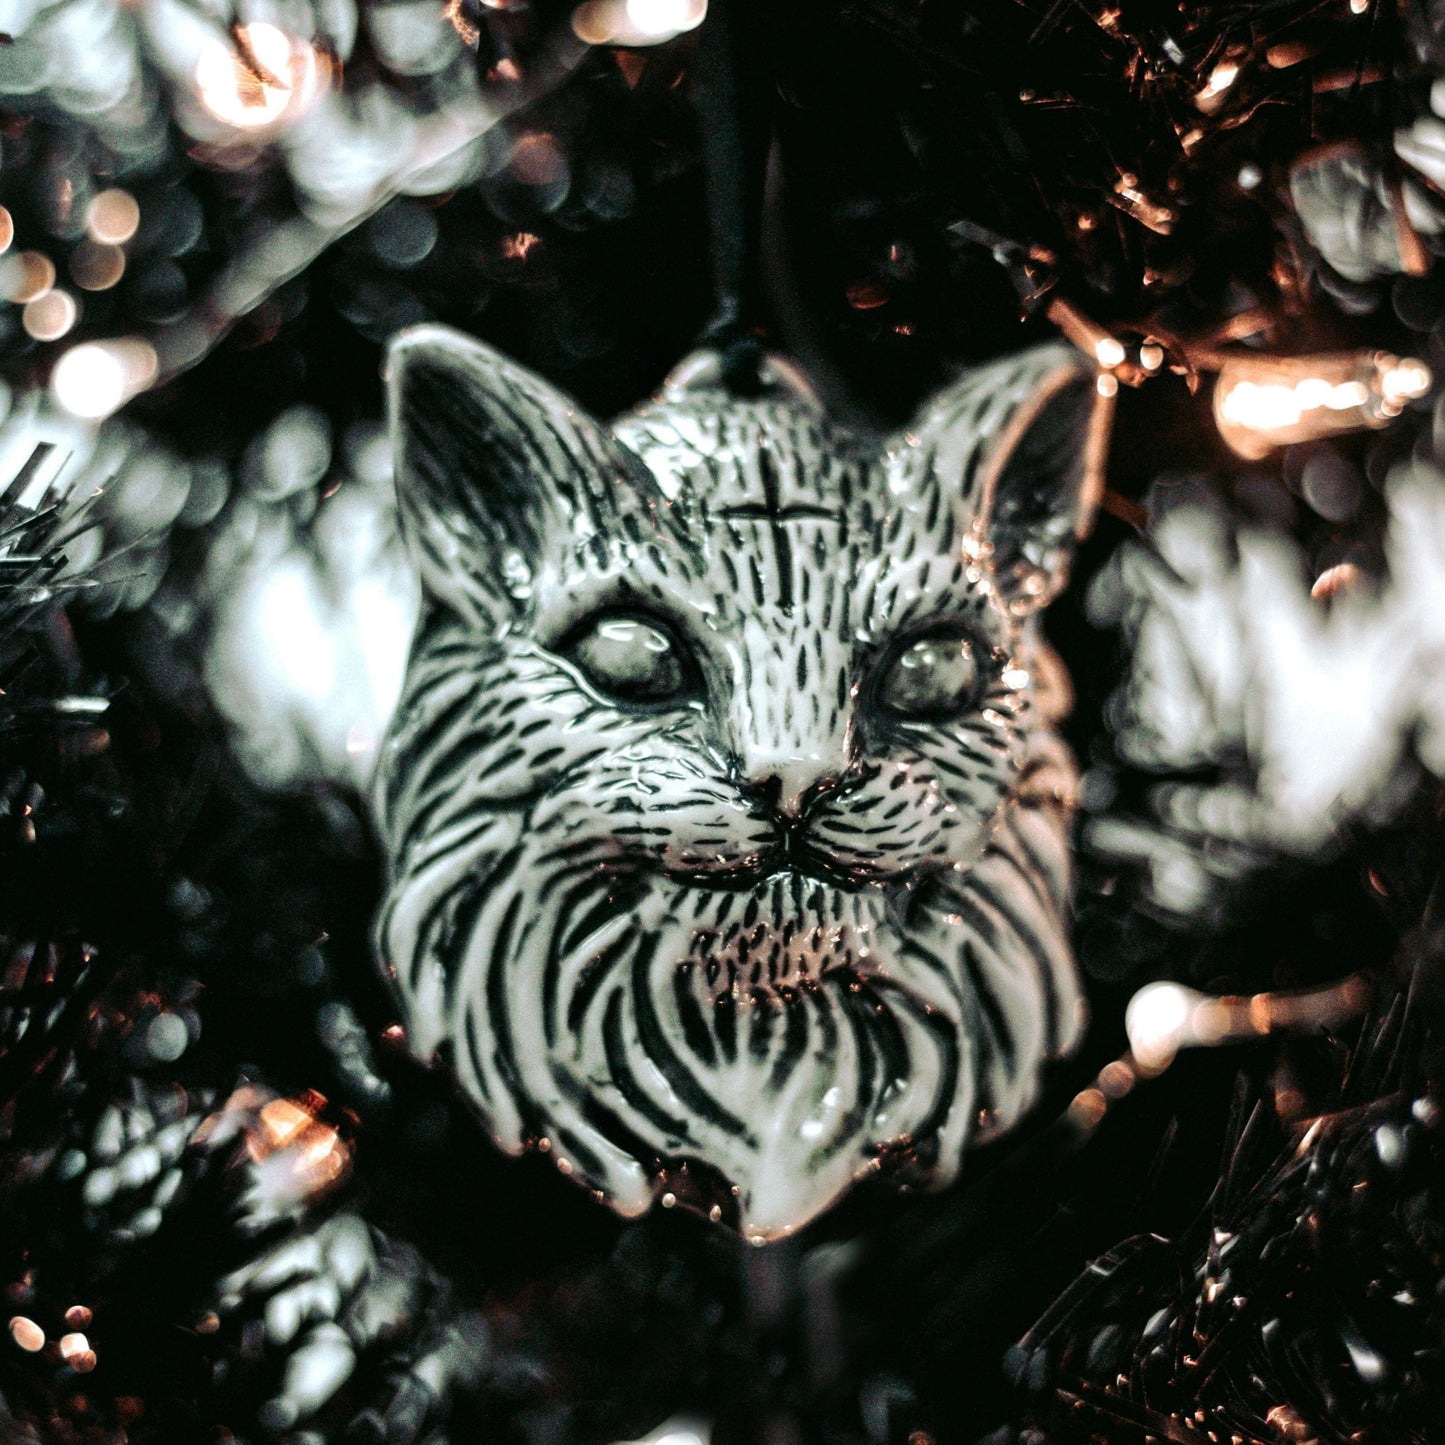 Lucipurr - Ceramic Ornament | Black and White Cat With Cross - Blackcraft Cult - Ornaments